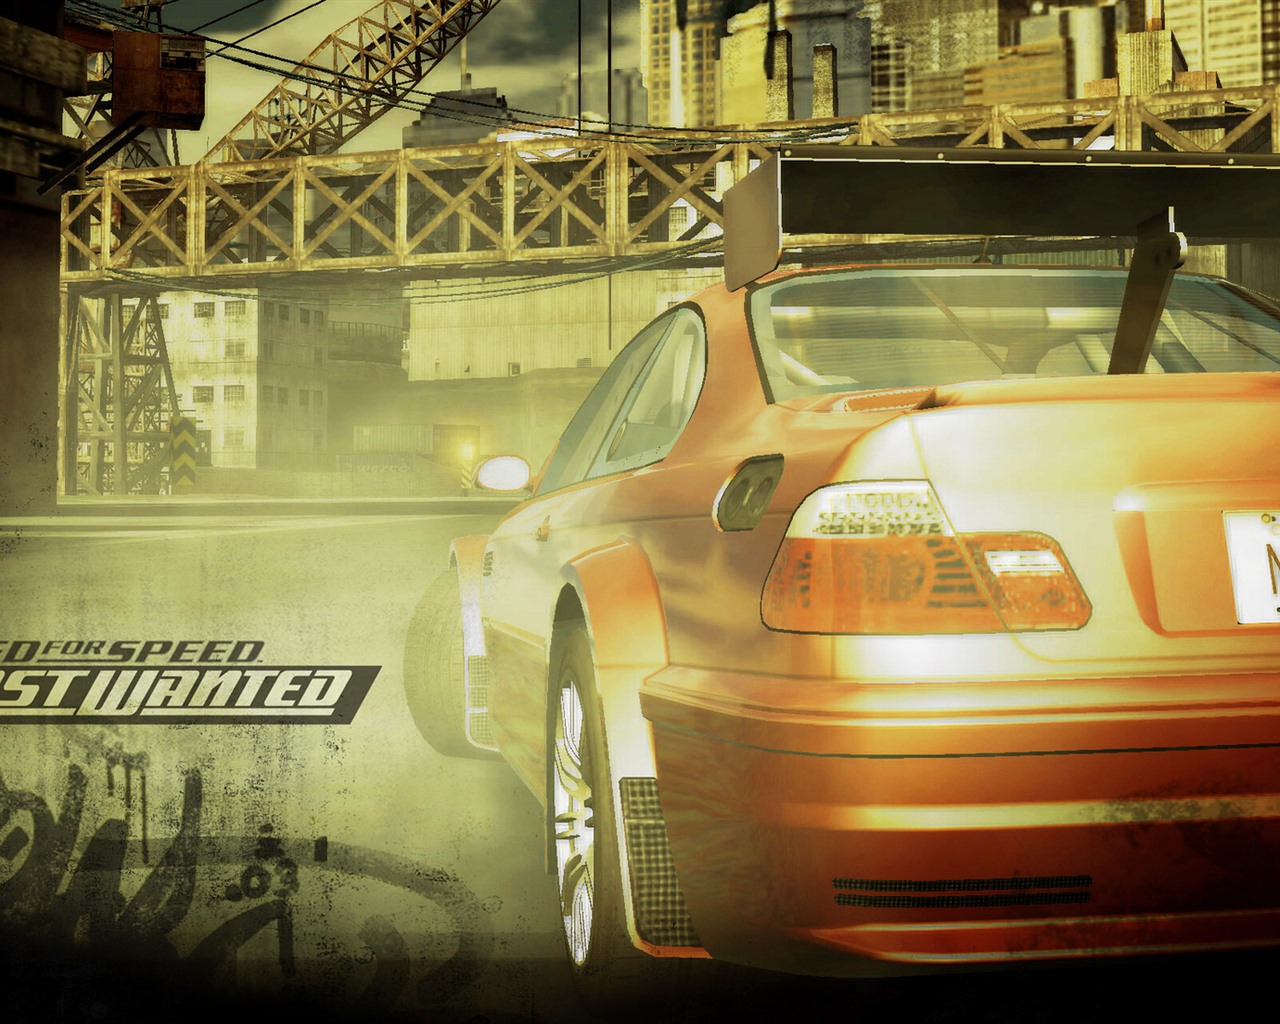 Need for Speed: Most Wanted 极品飞车17：最高通缉 高清壁纸4 - 1280x1024